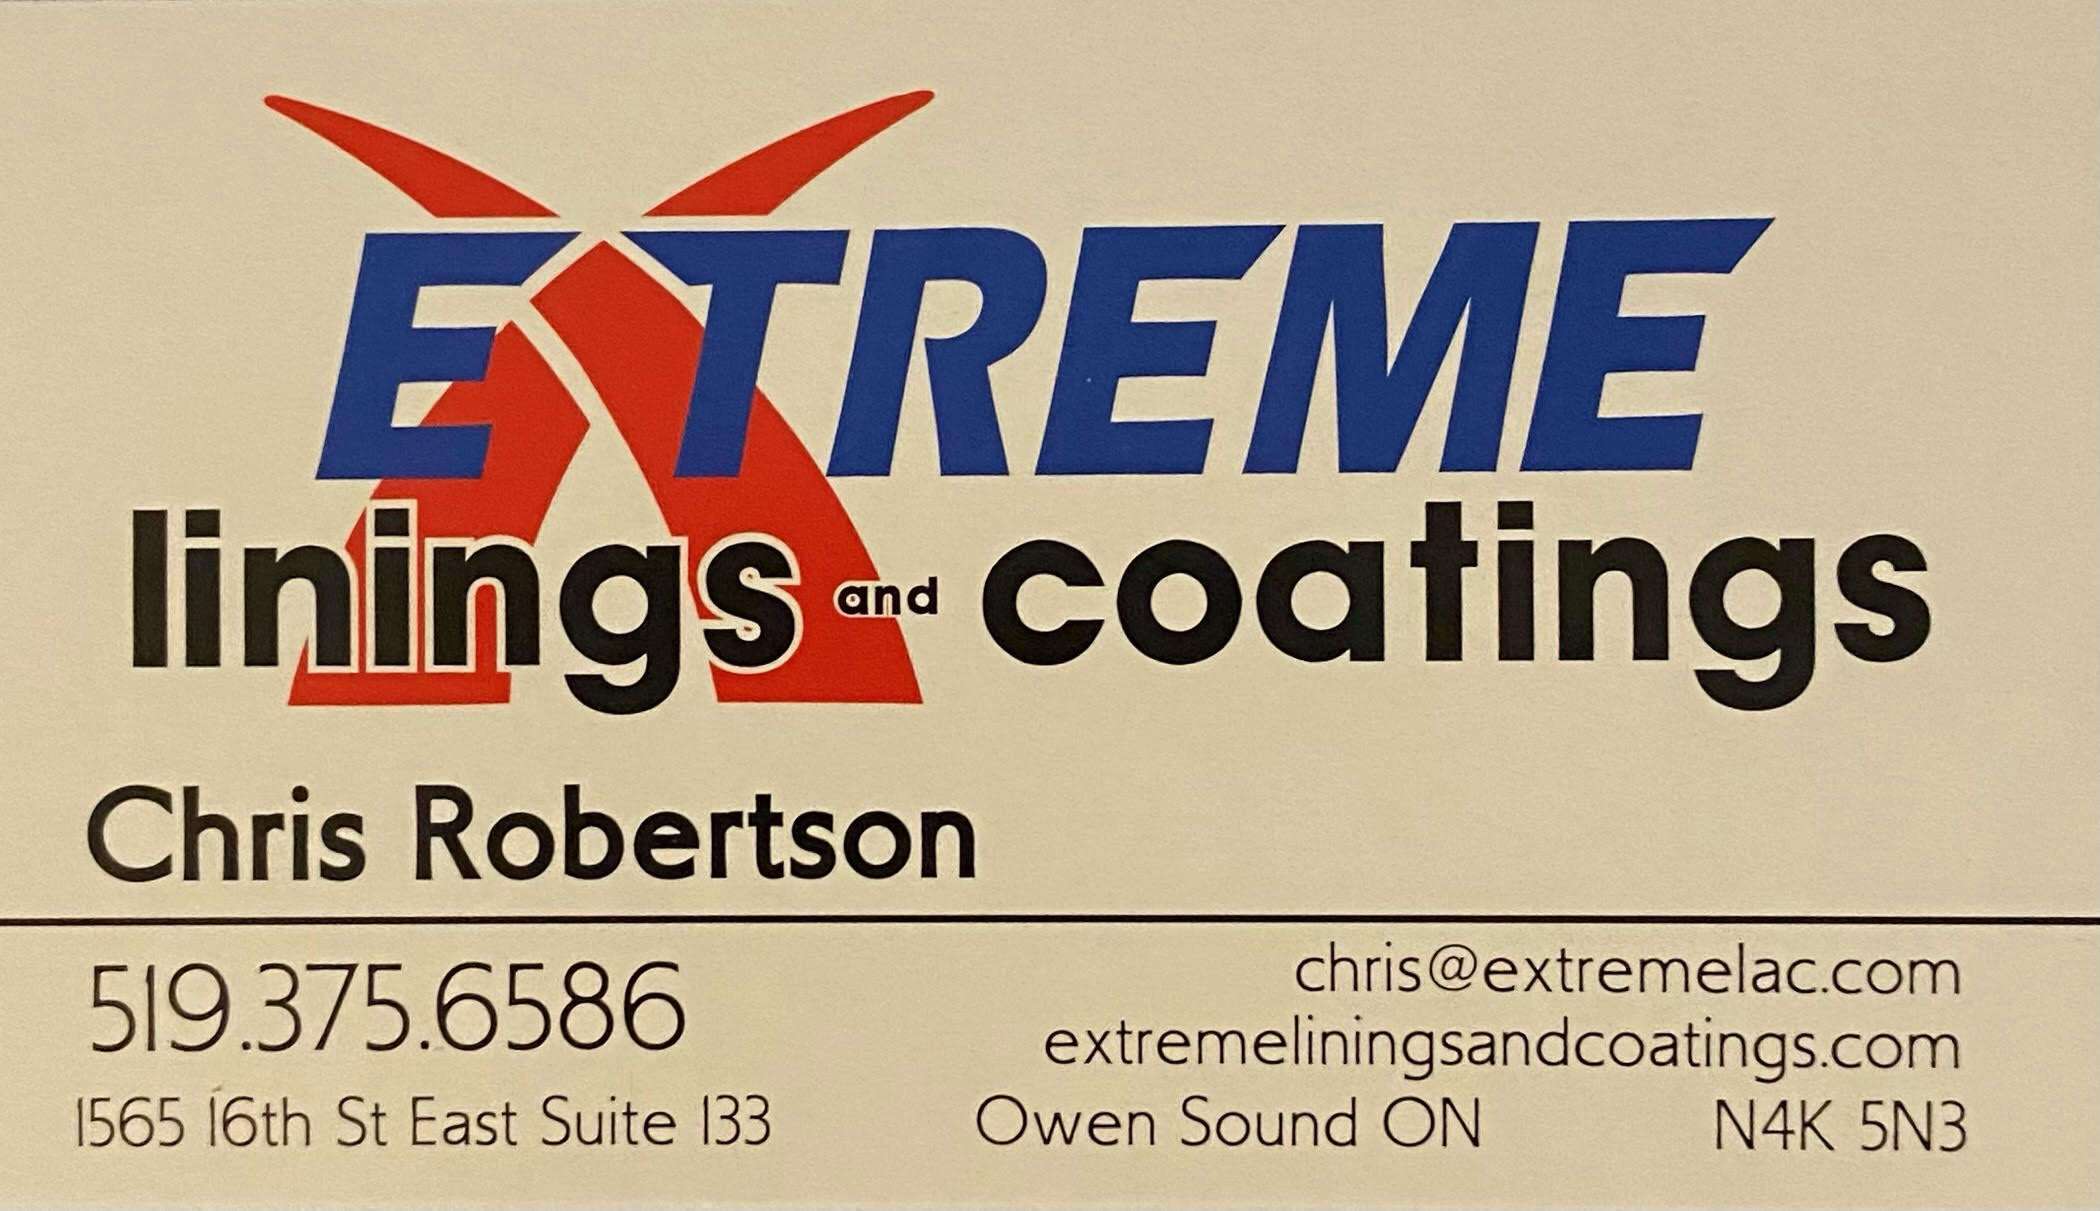 Chris Robertson- Extreme Linings and Coatings